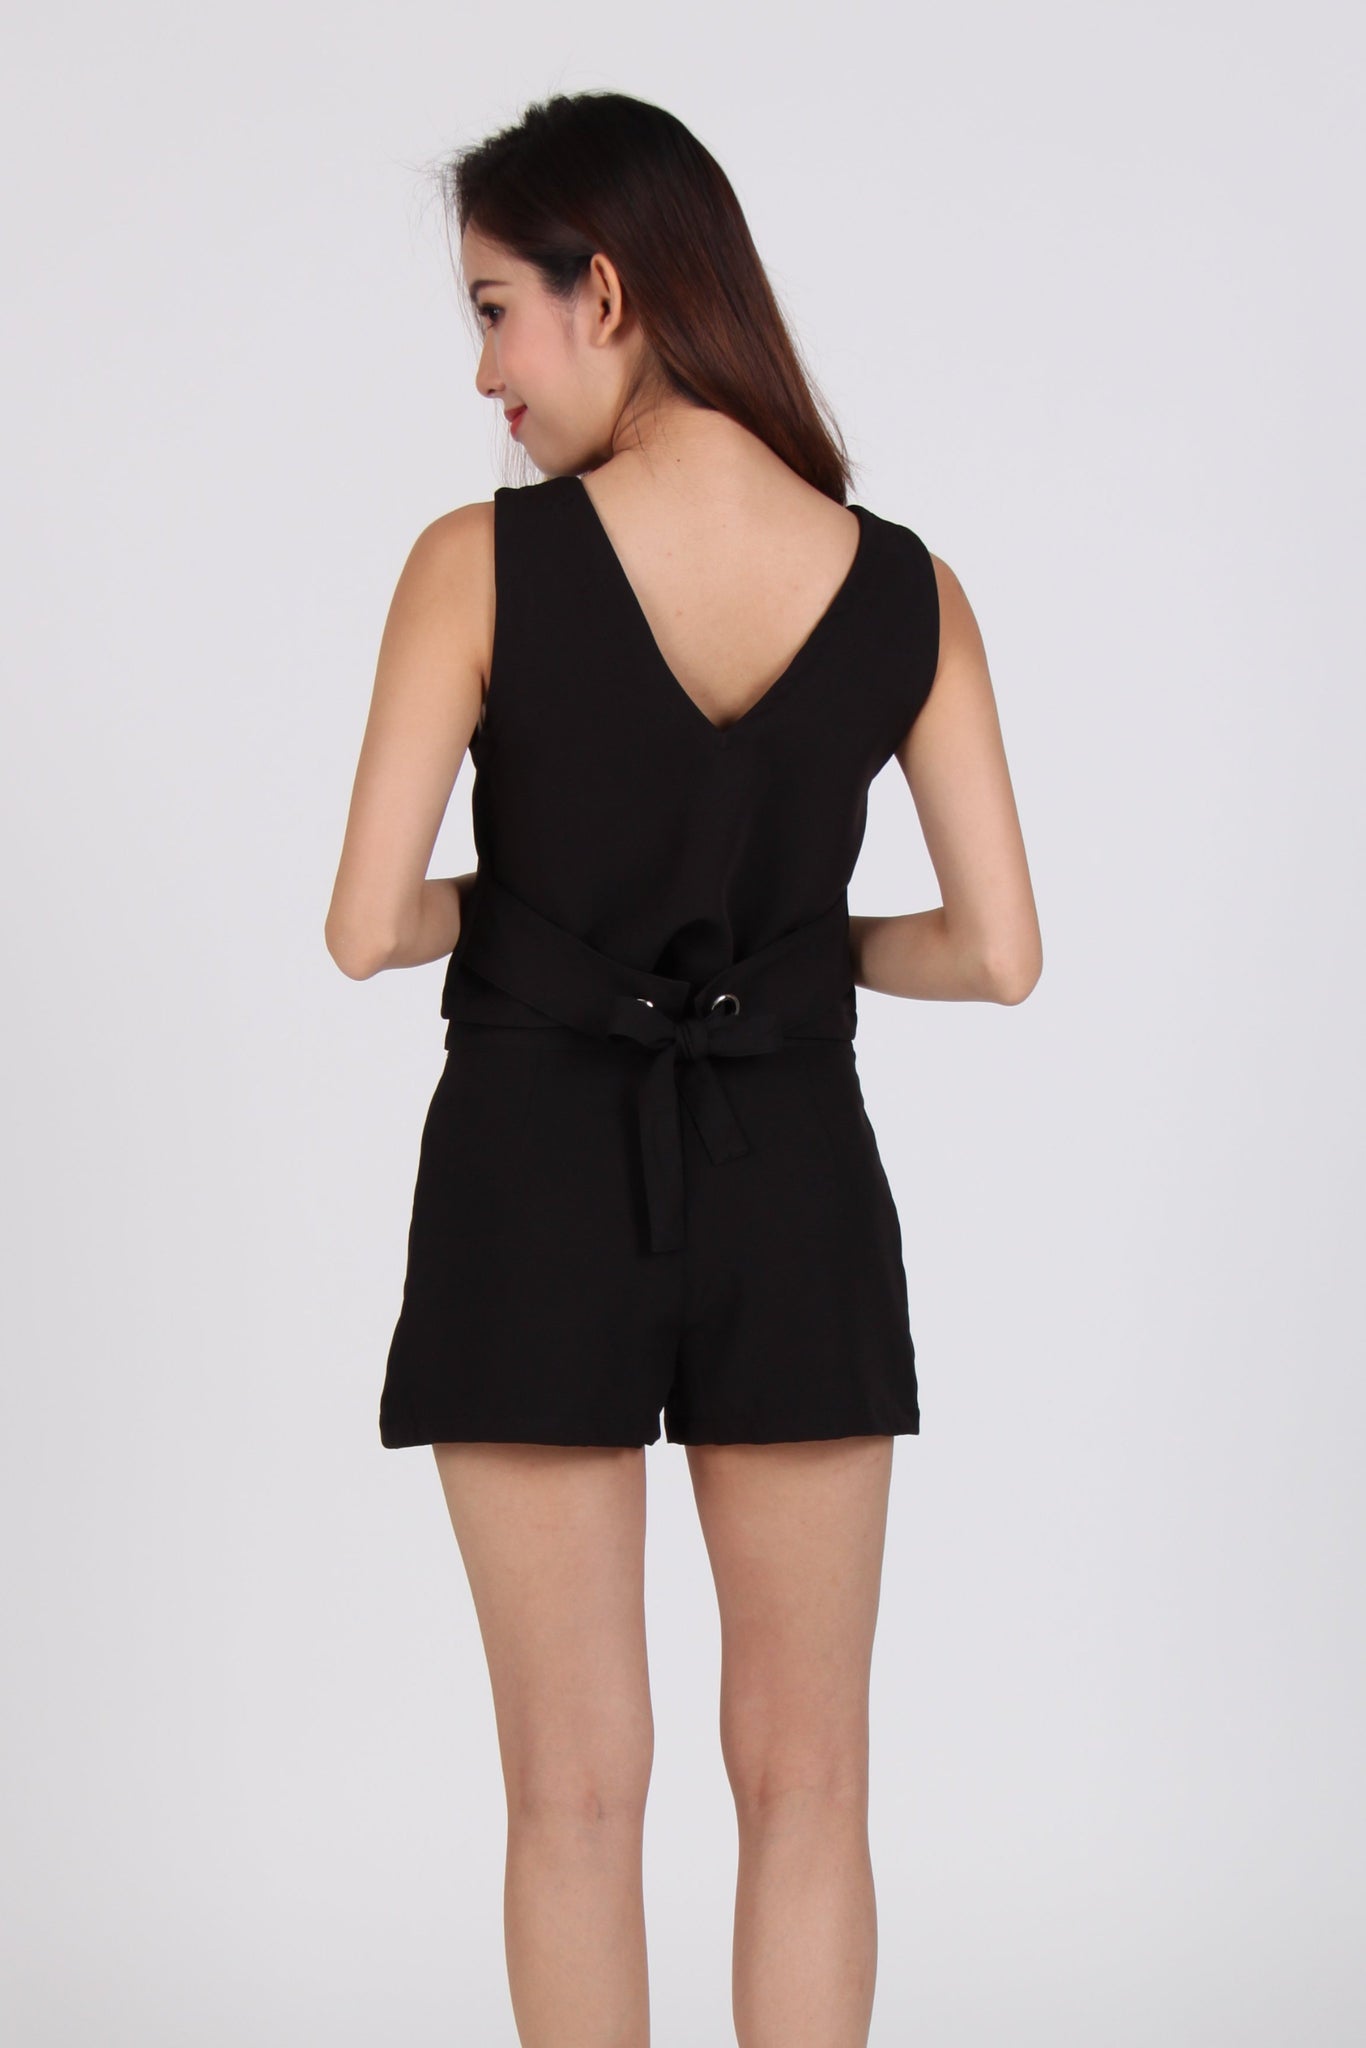 2 Piece Back Tie Top with Shorts in Black